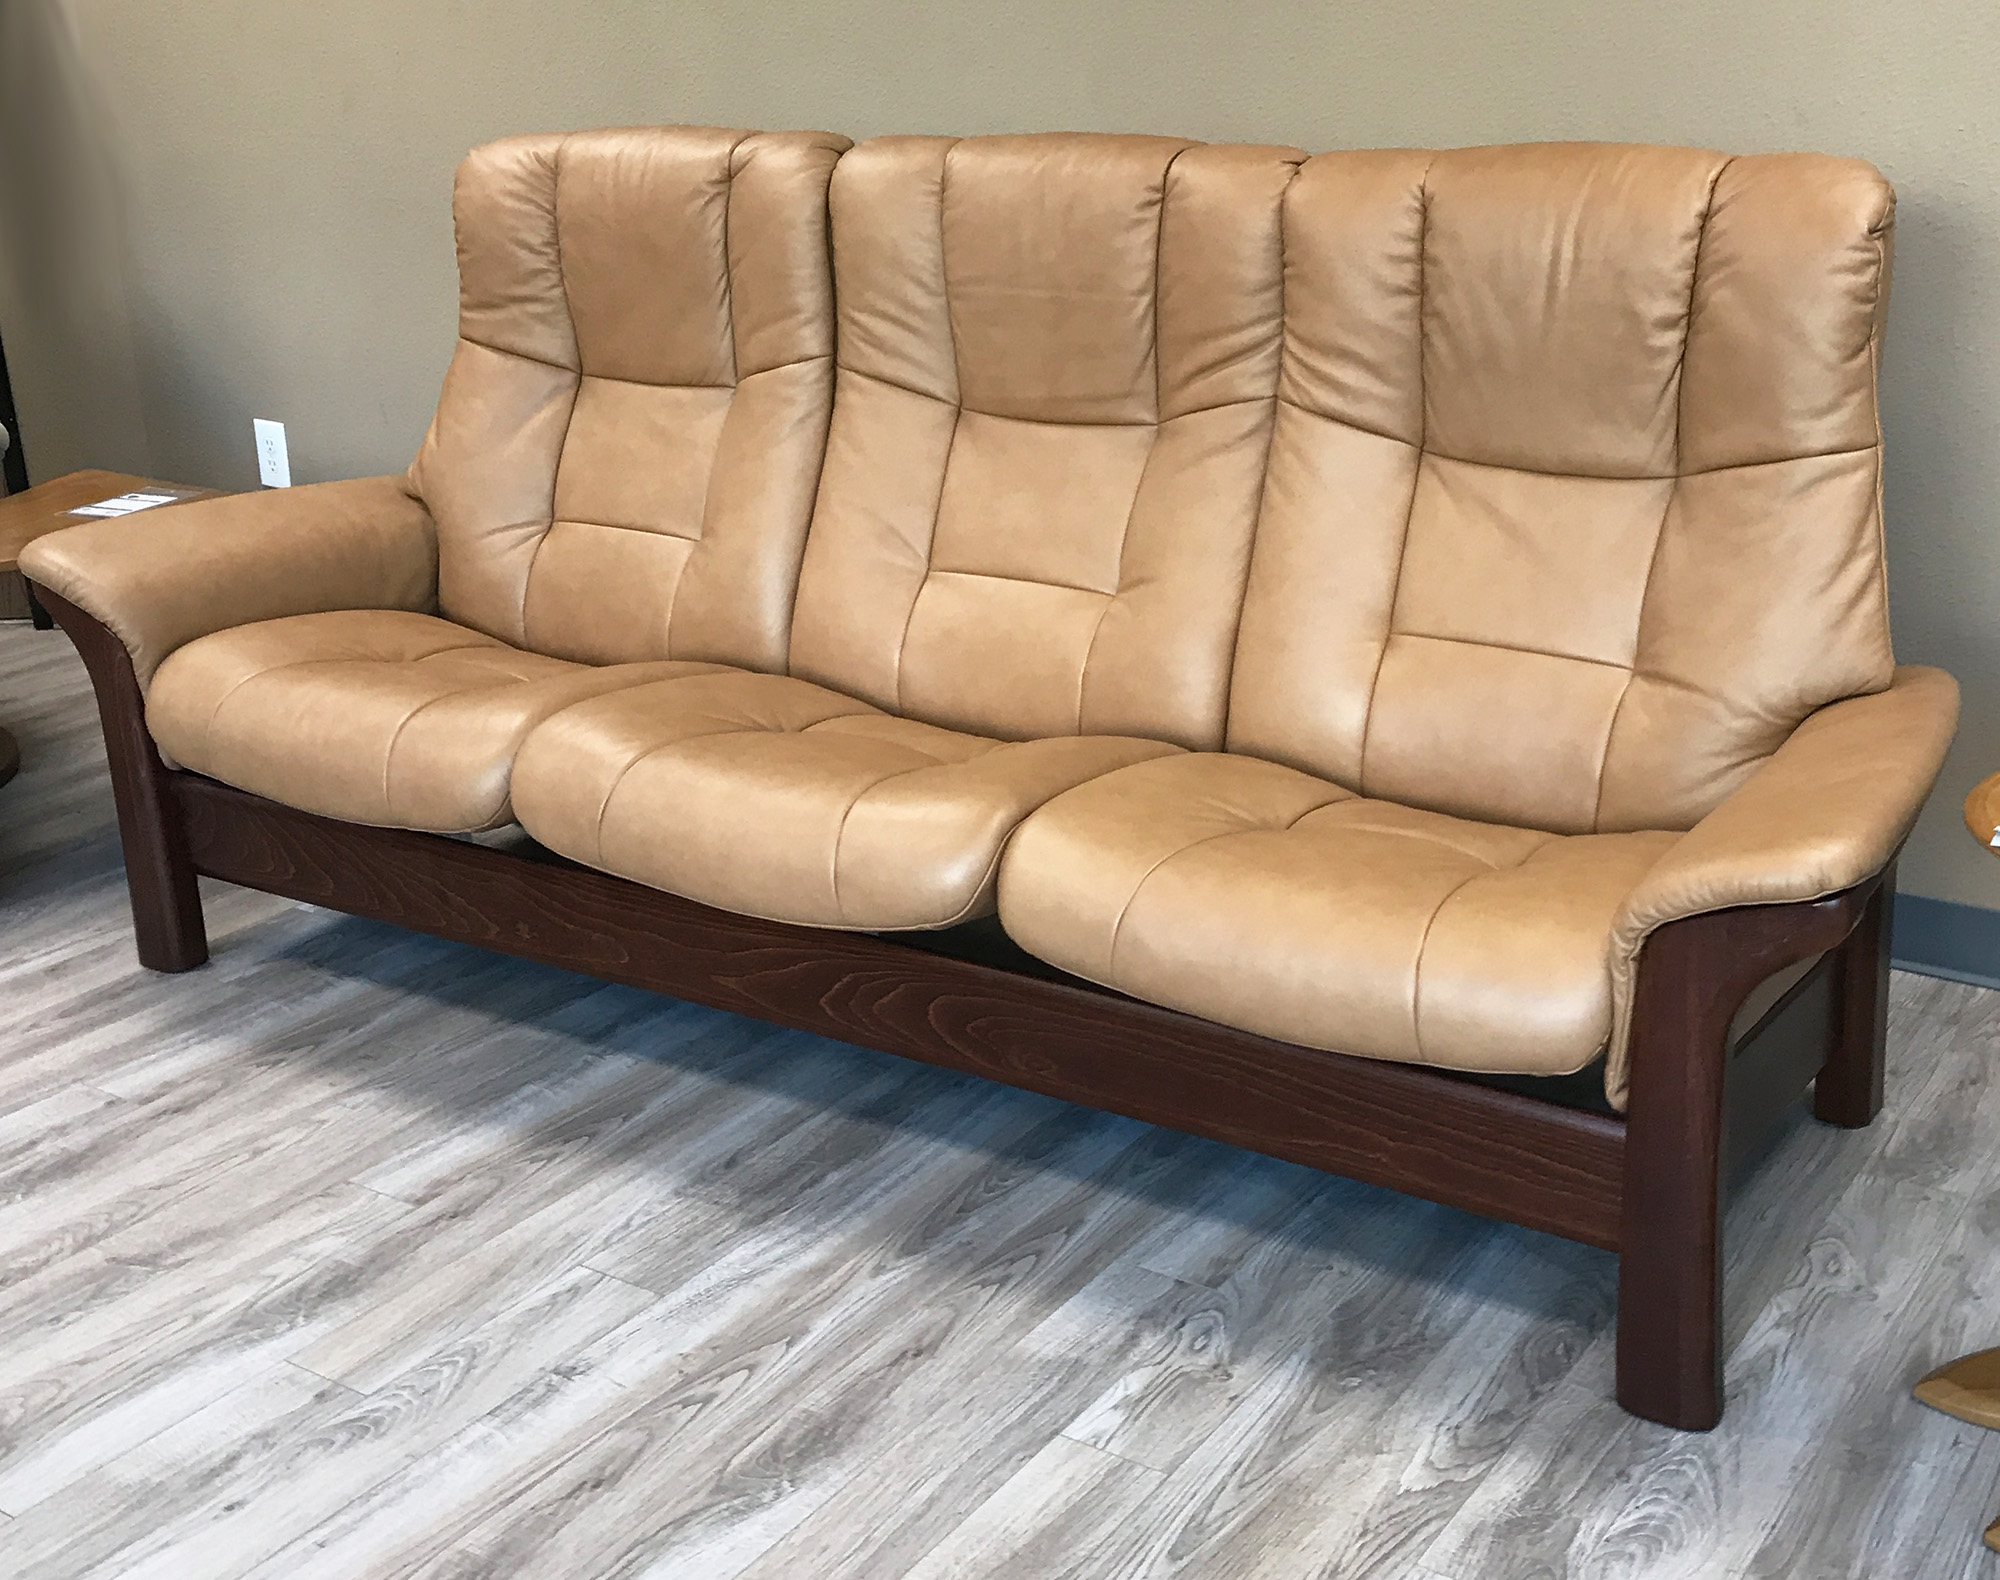 stressless sofa leather colors